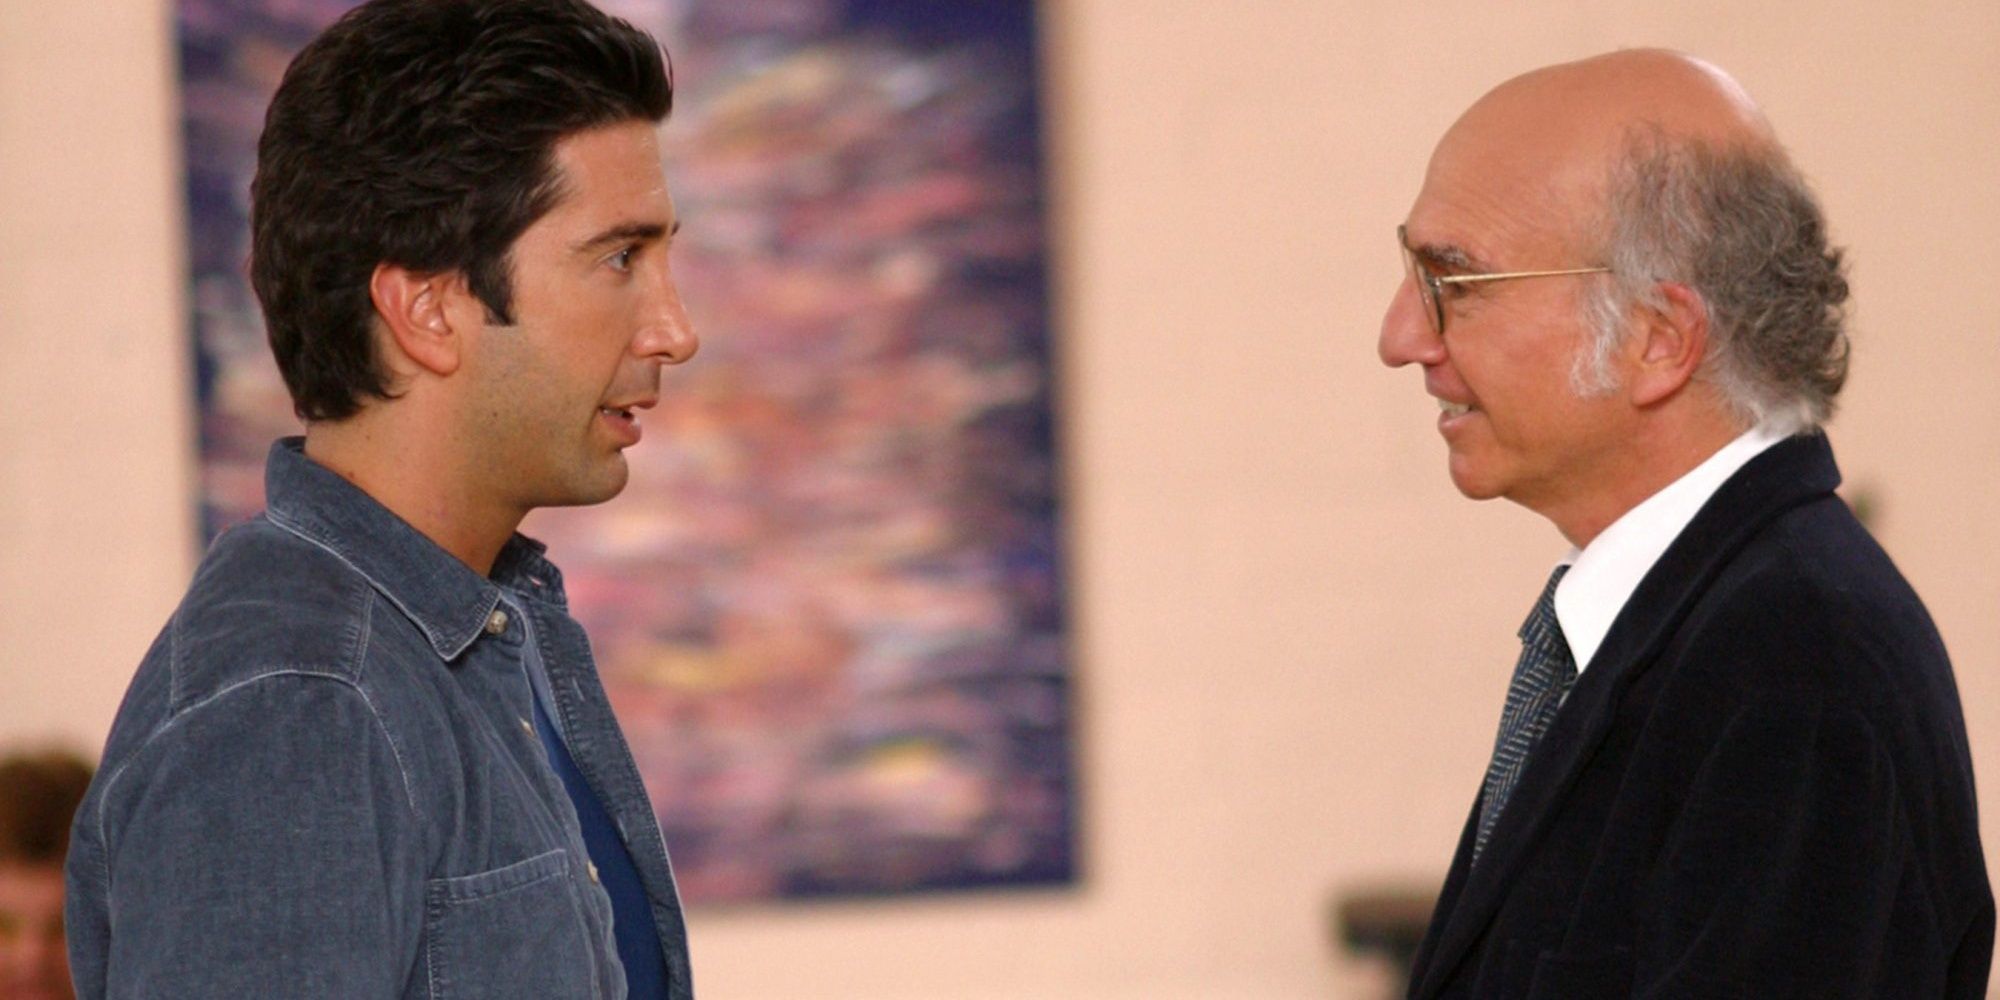 Curb Your Enthusiasm 10 Storylines The Show Dropped